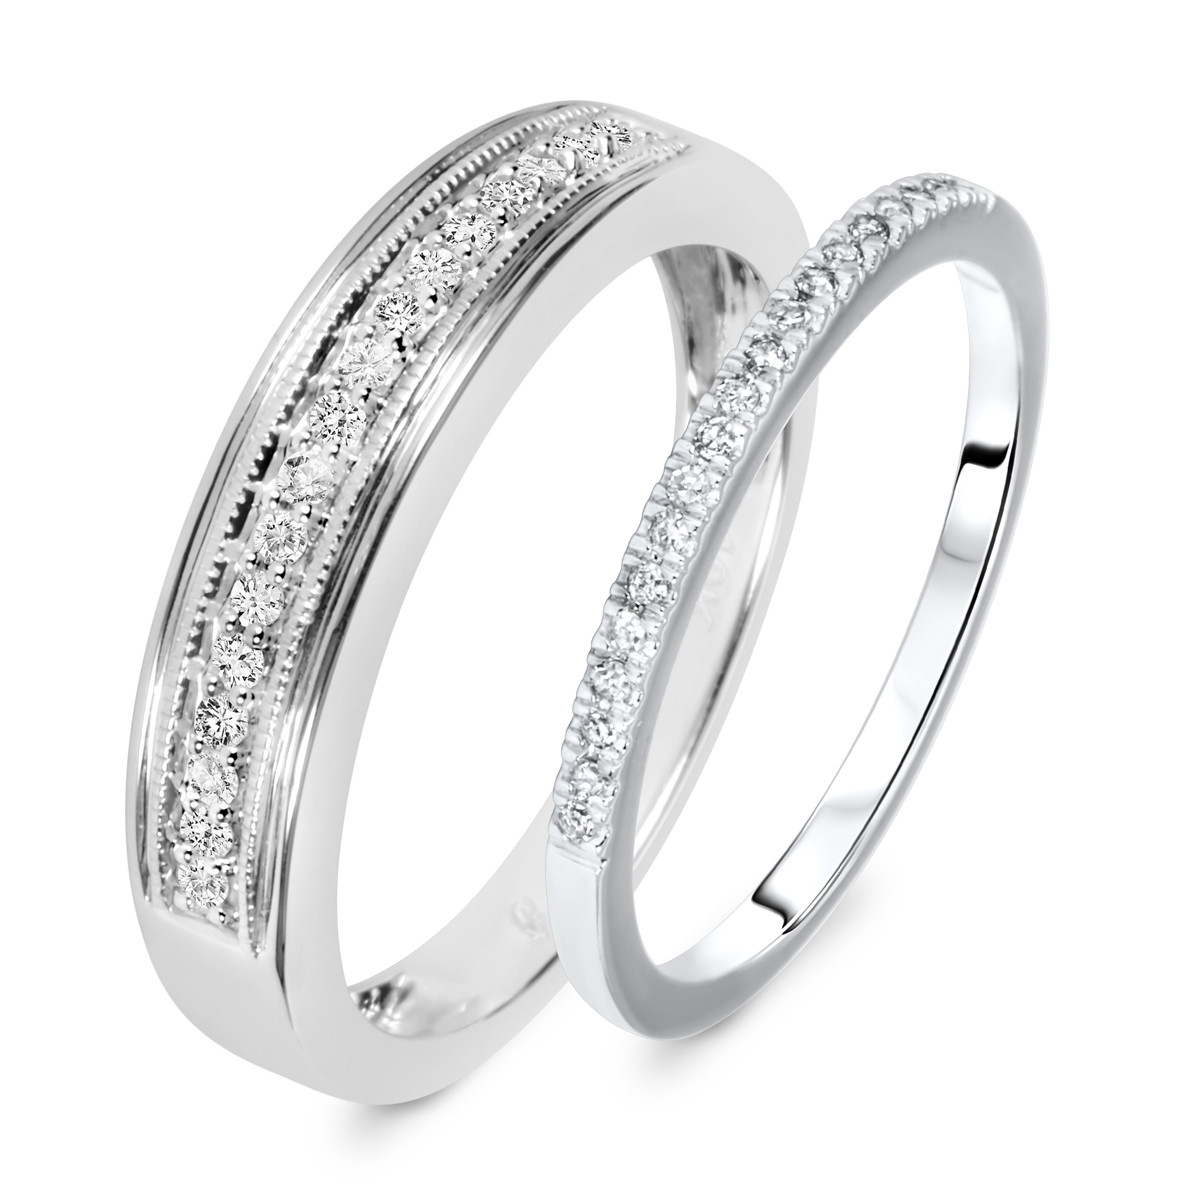 Wedding Band Sets White Gold
 1 4 Carat T W Round Cut Diamond His And Hers Wedding Band